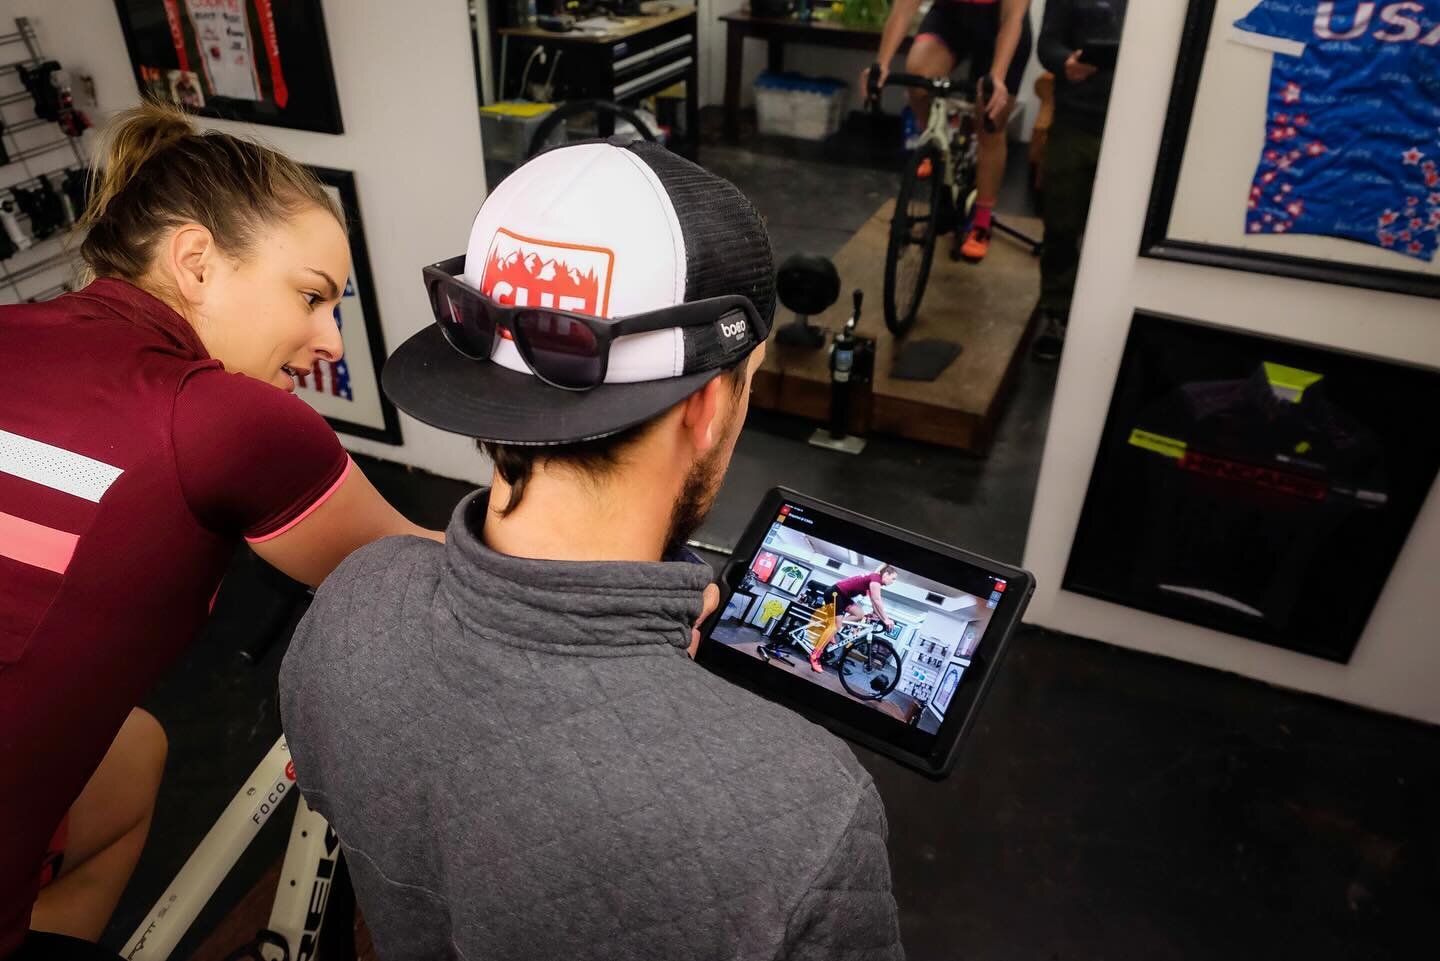 Spring is here! And that means many are looking to get in a bike fit. At the same time. Definitely reach out early so we can get you taken care of and maximize the season 🙌

Learn more about our bike fit services, prices, and the contact email to ge